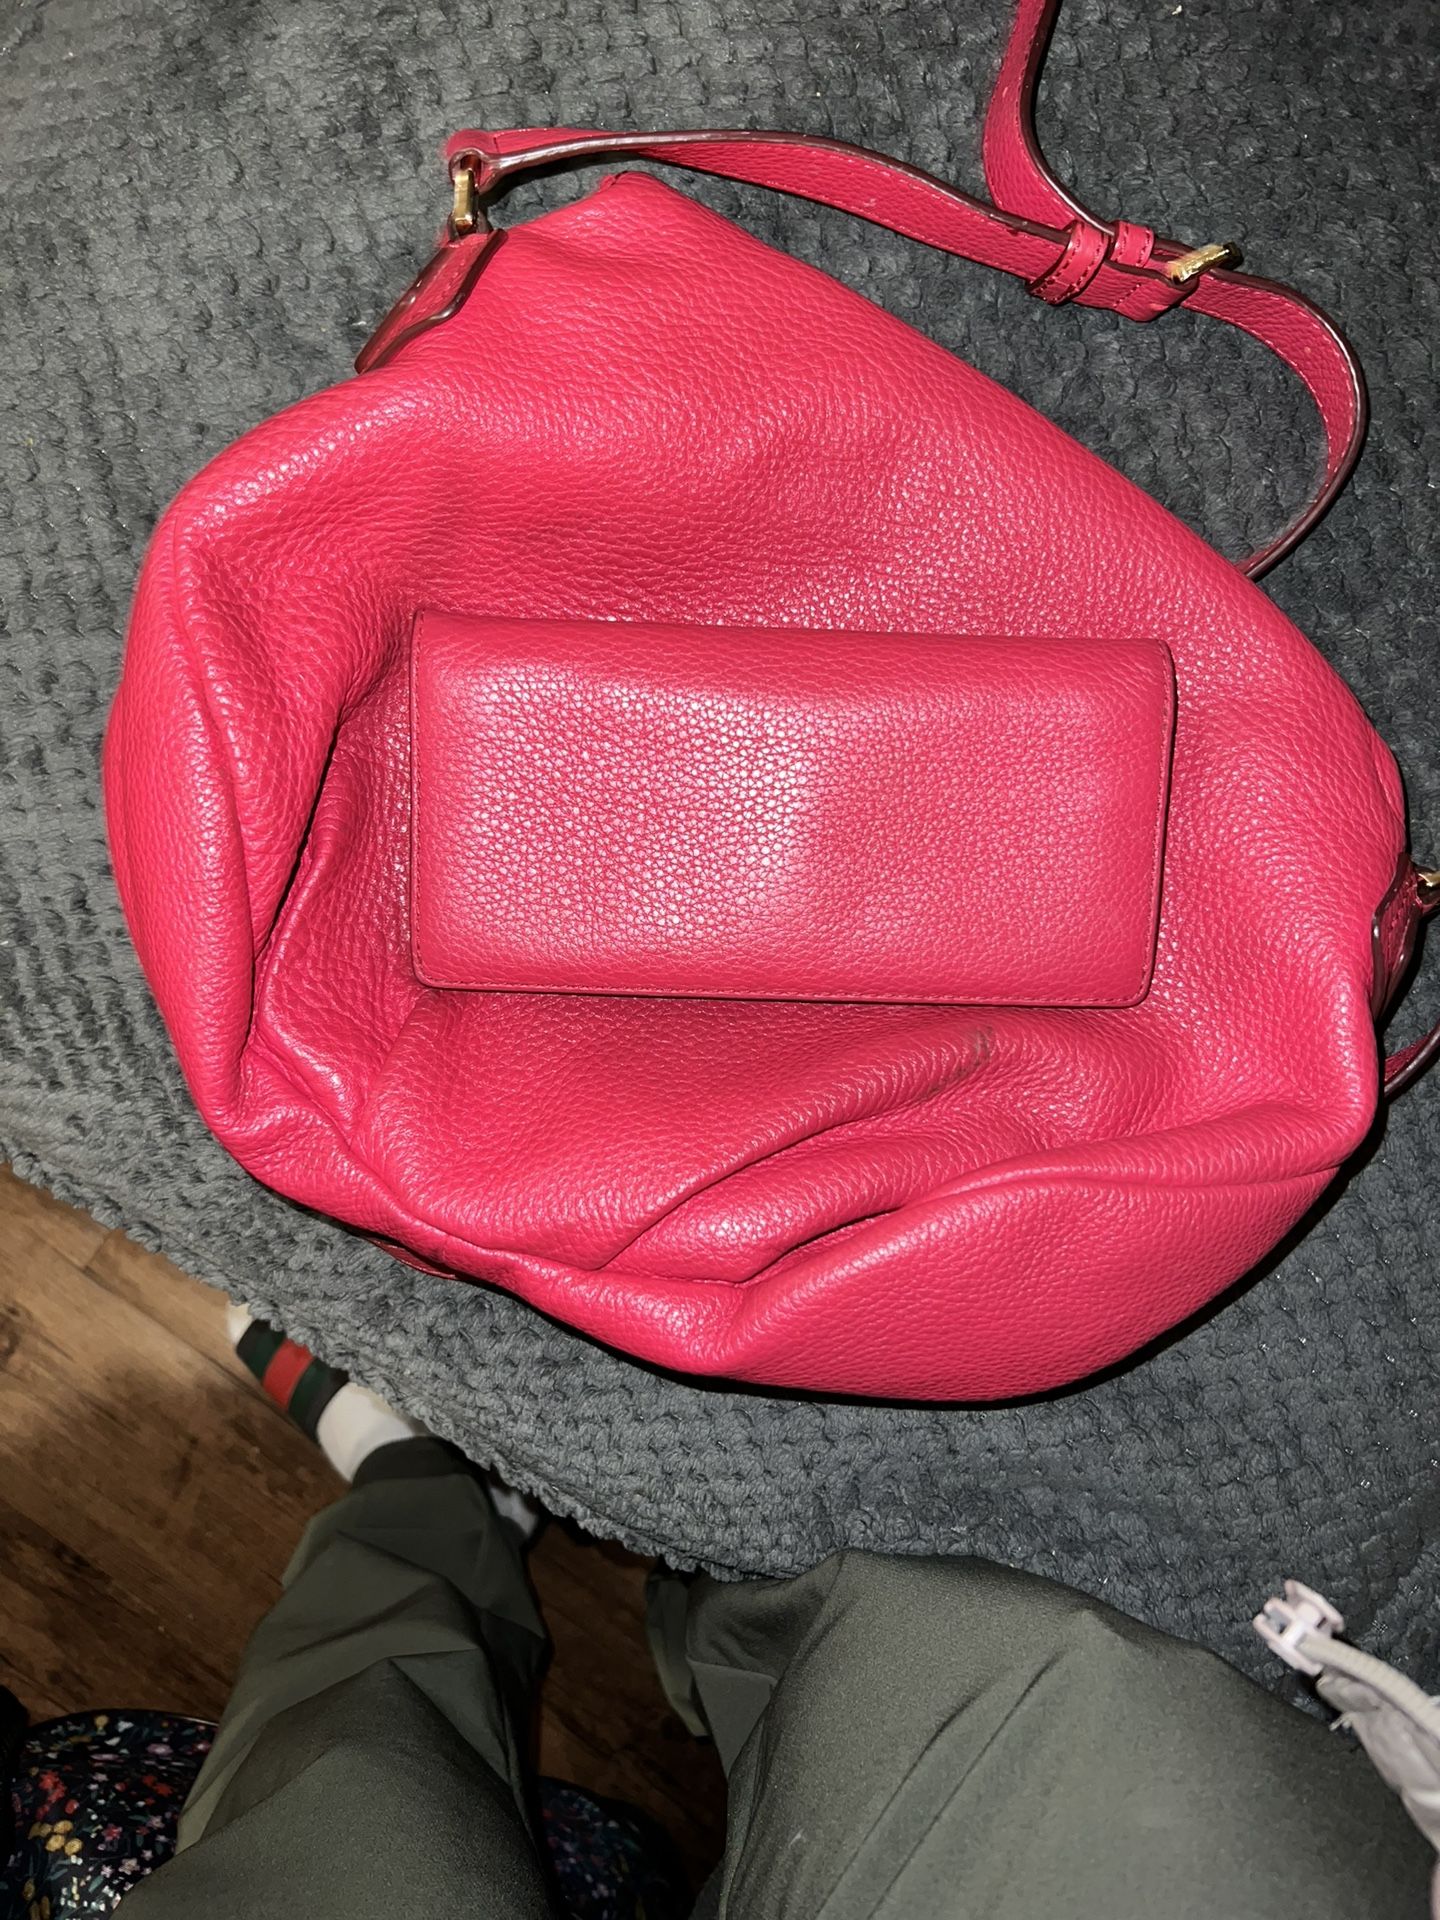 marc jacob purse and wallet